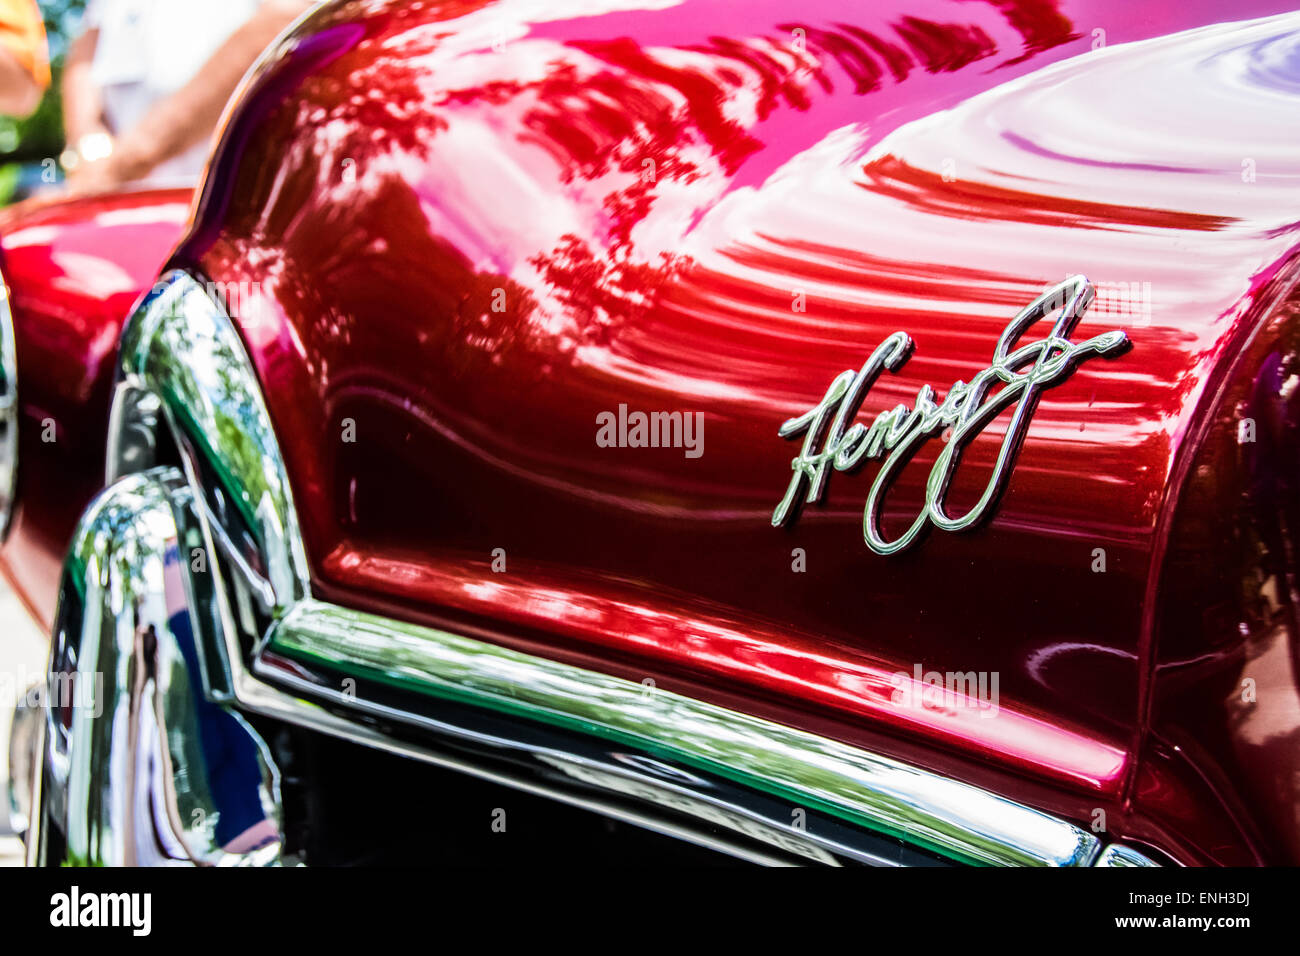 Candy Apple Vintage Auto Stock Photo - Download Image Now